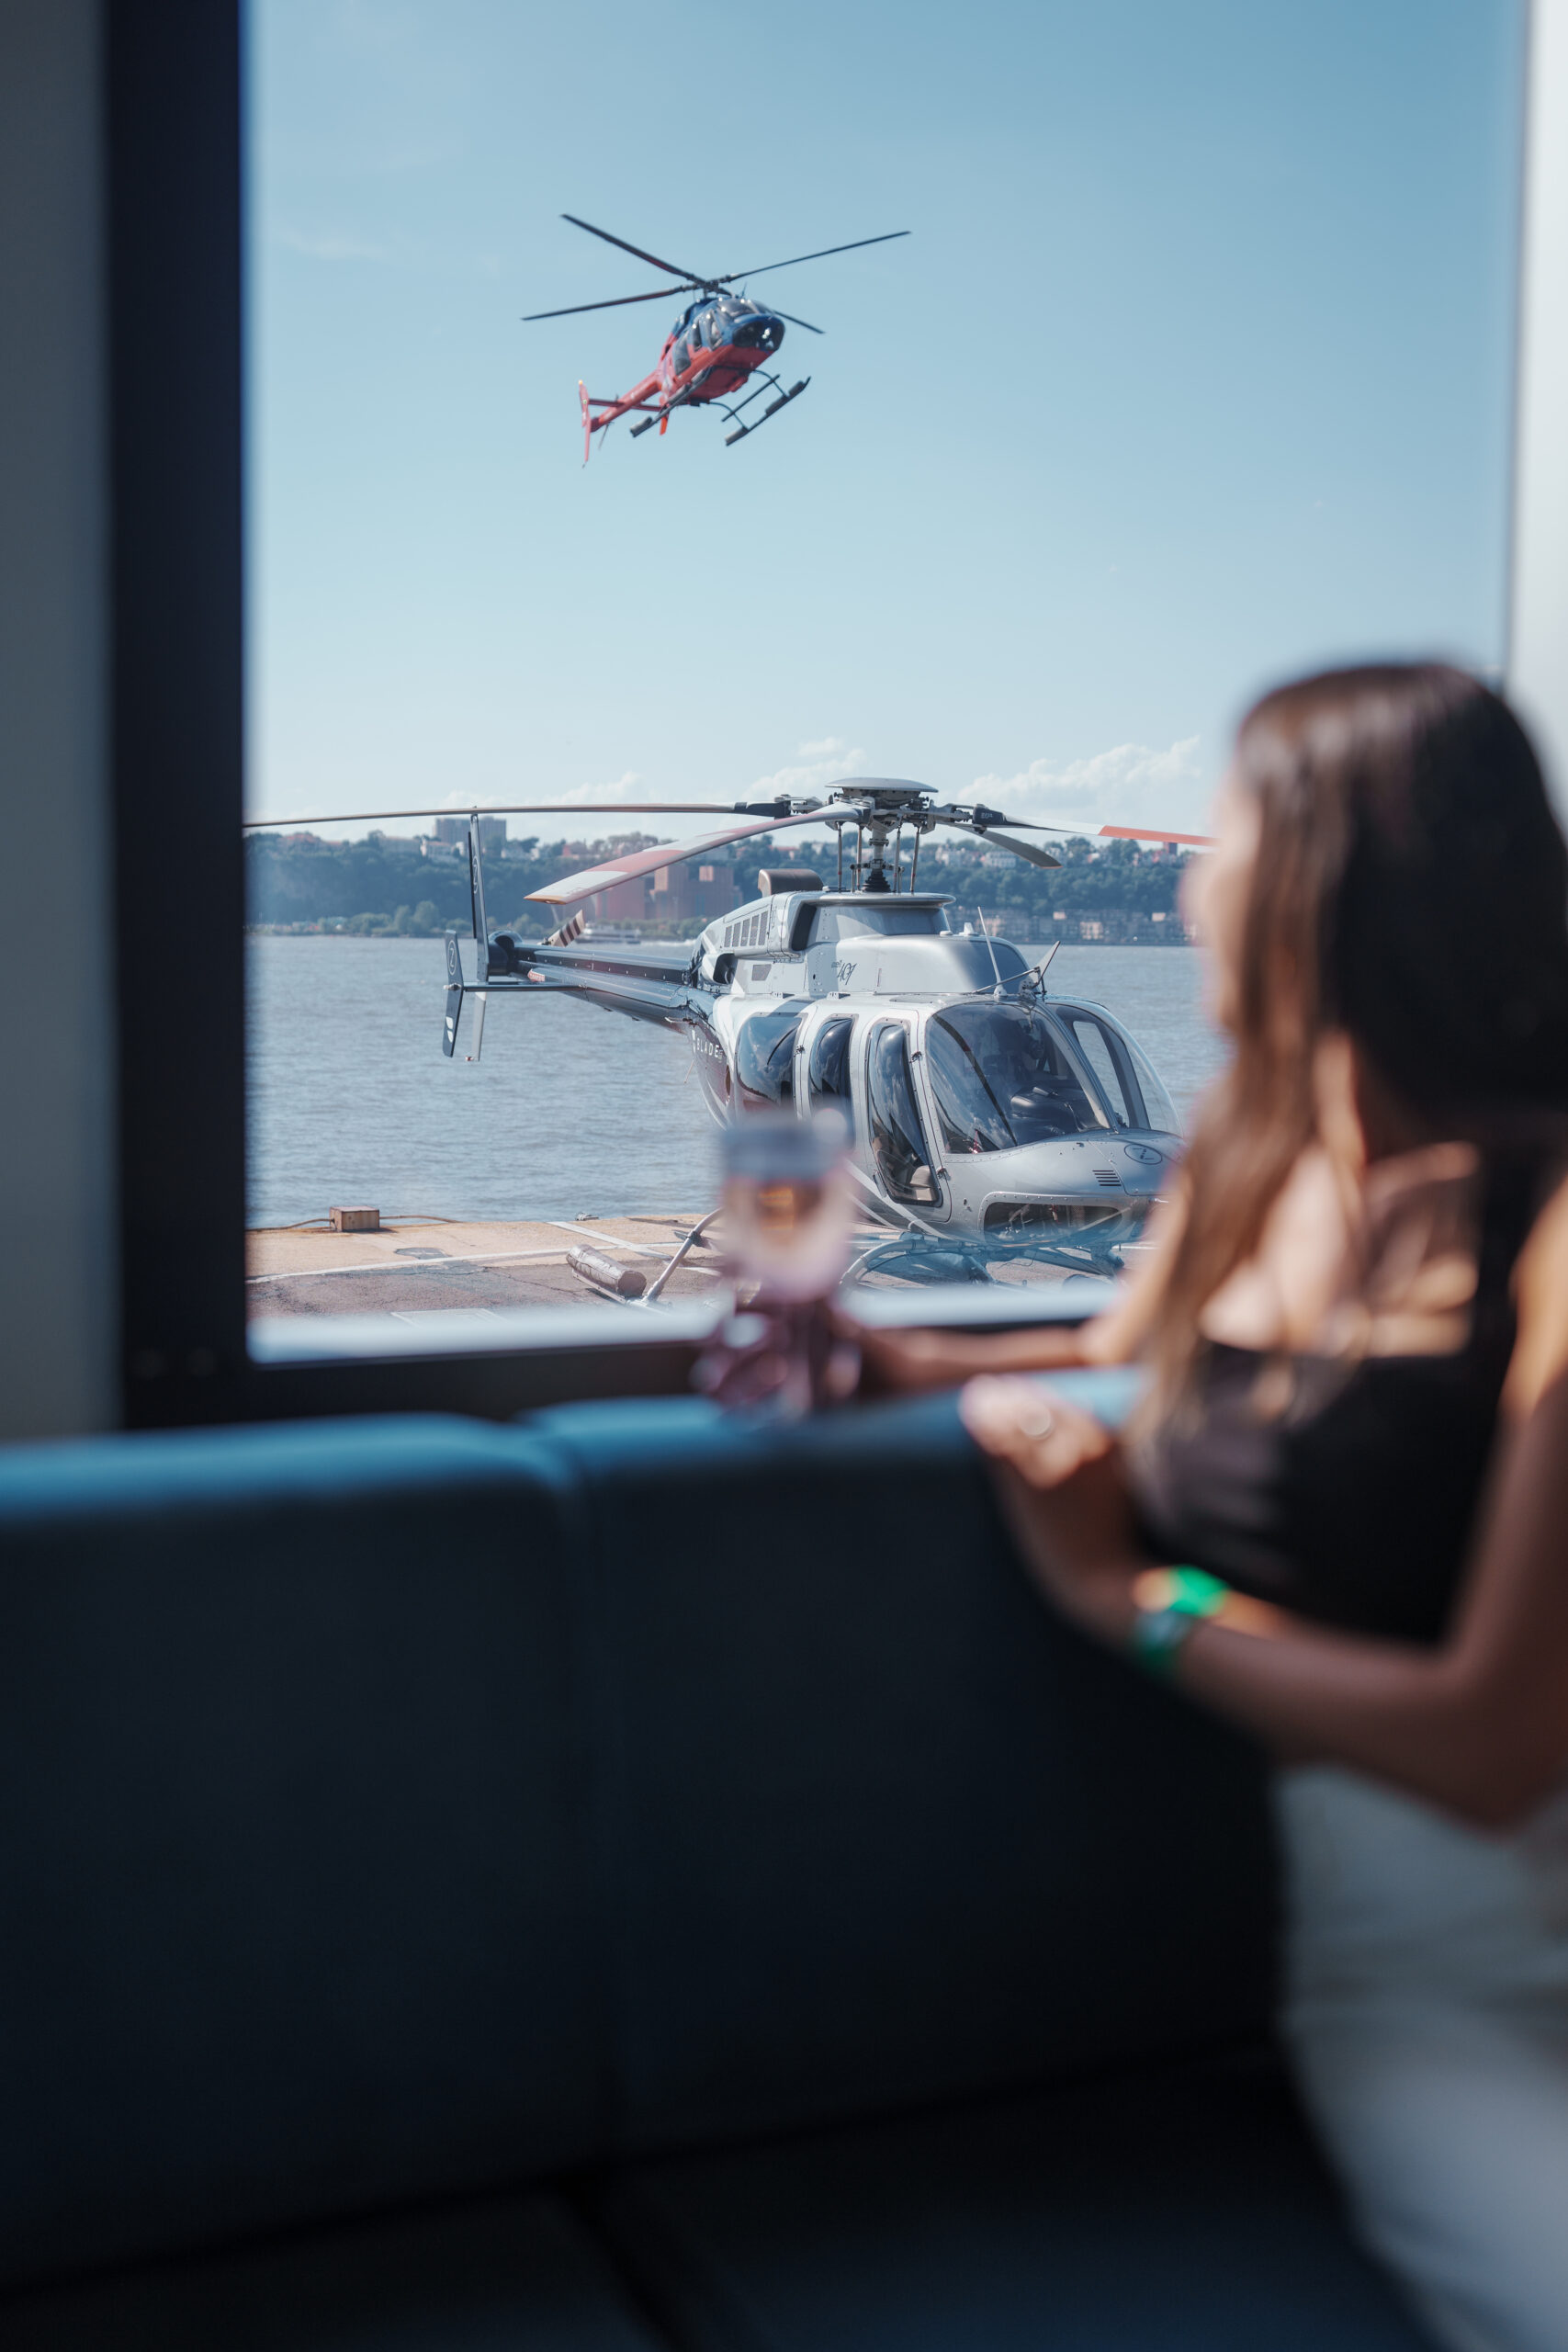 Two helicopters and a girl looking through the window